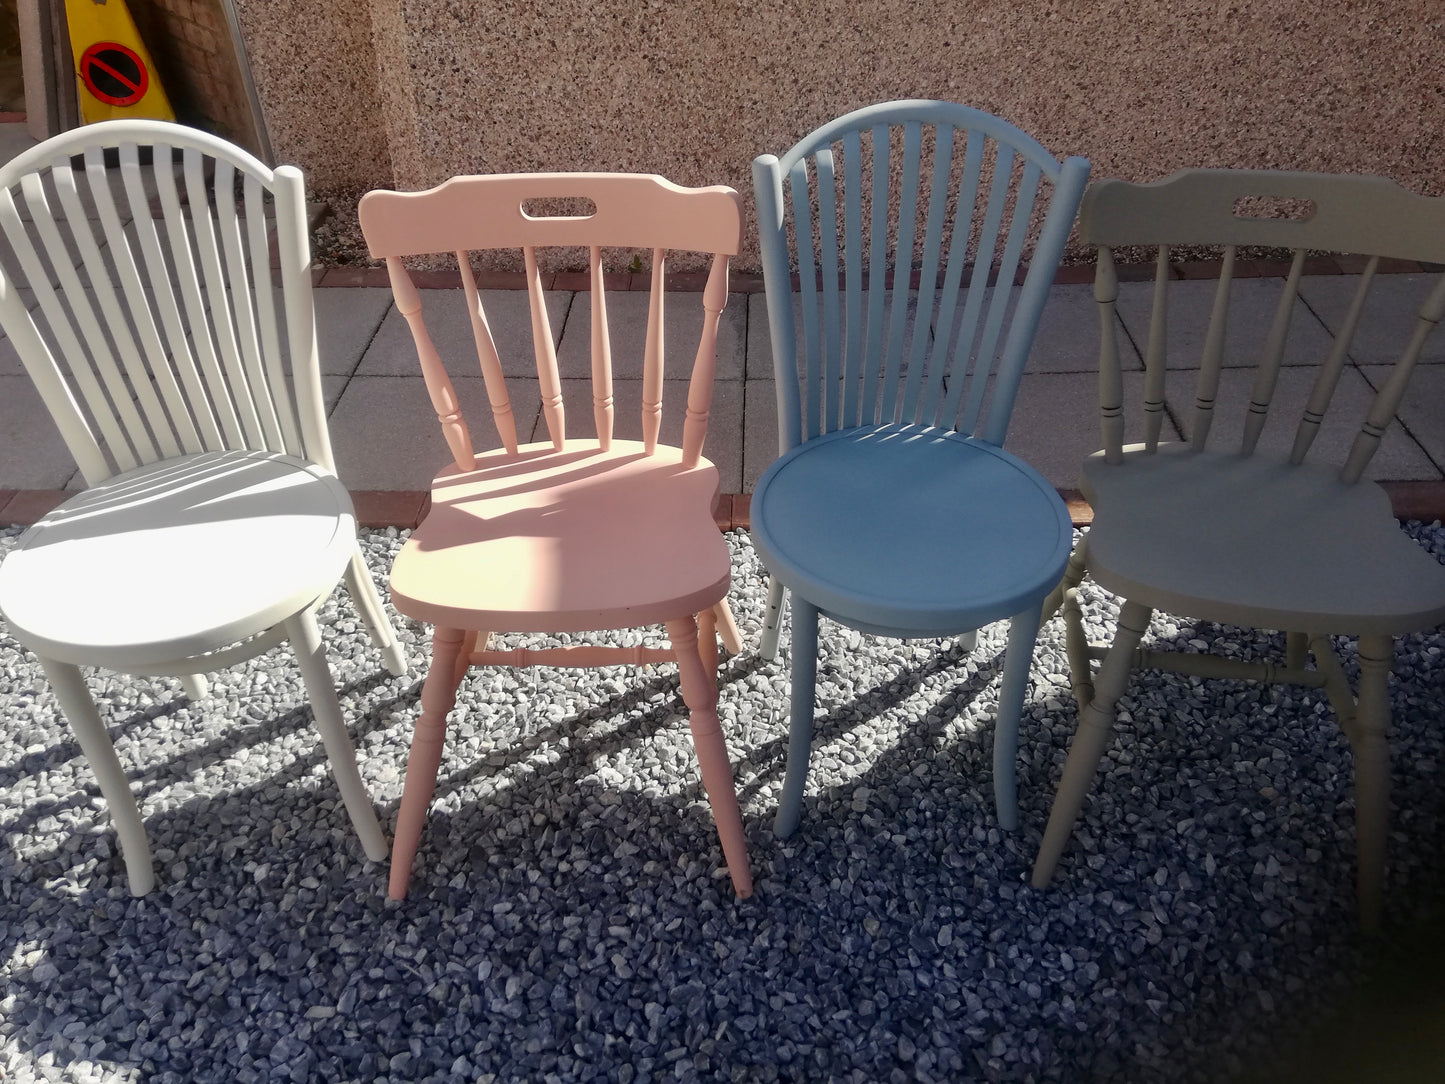 Commission for Martha 4 mismatched dining chairs in Dixie Belle Paint